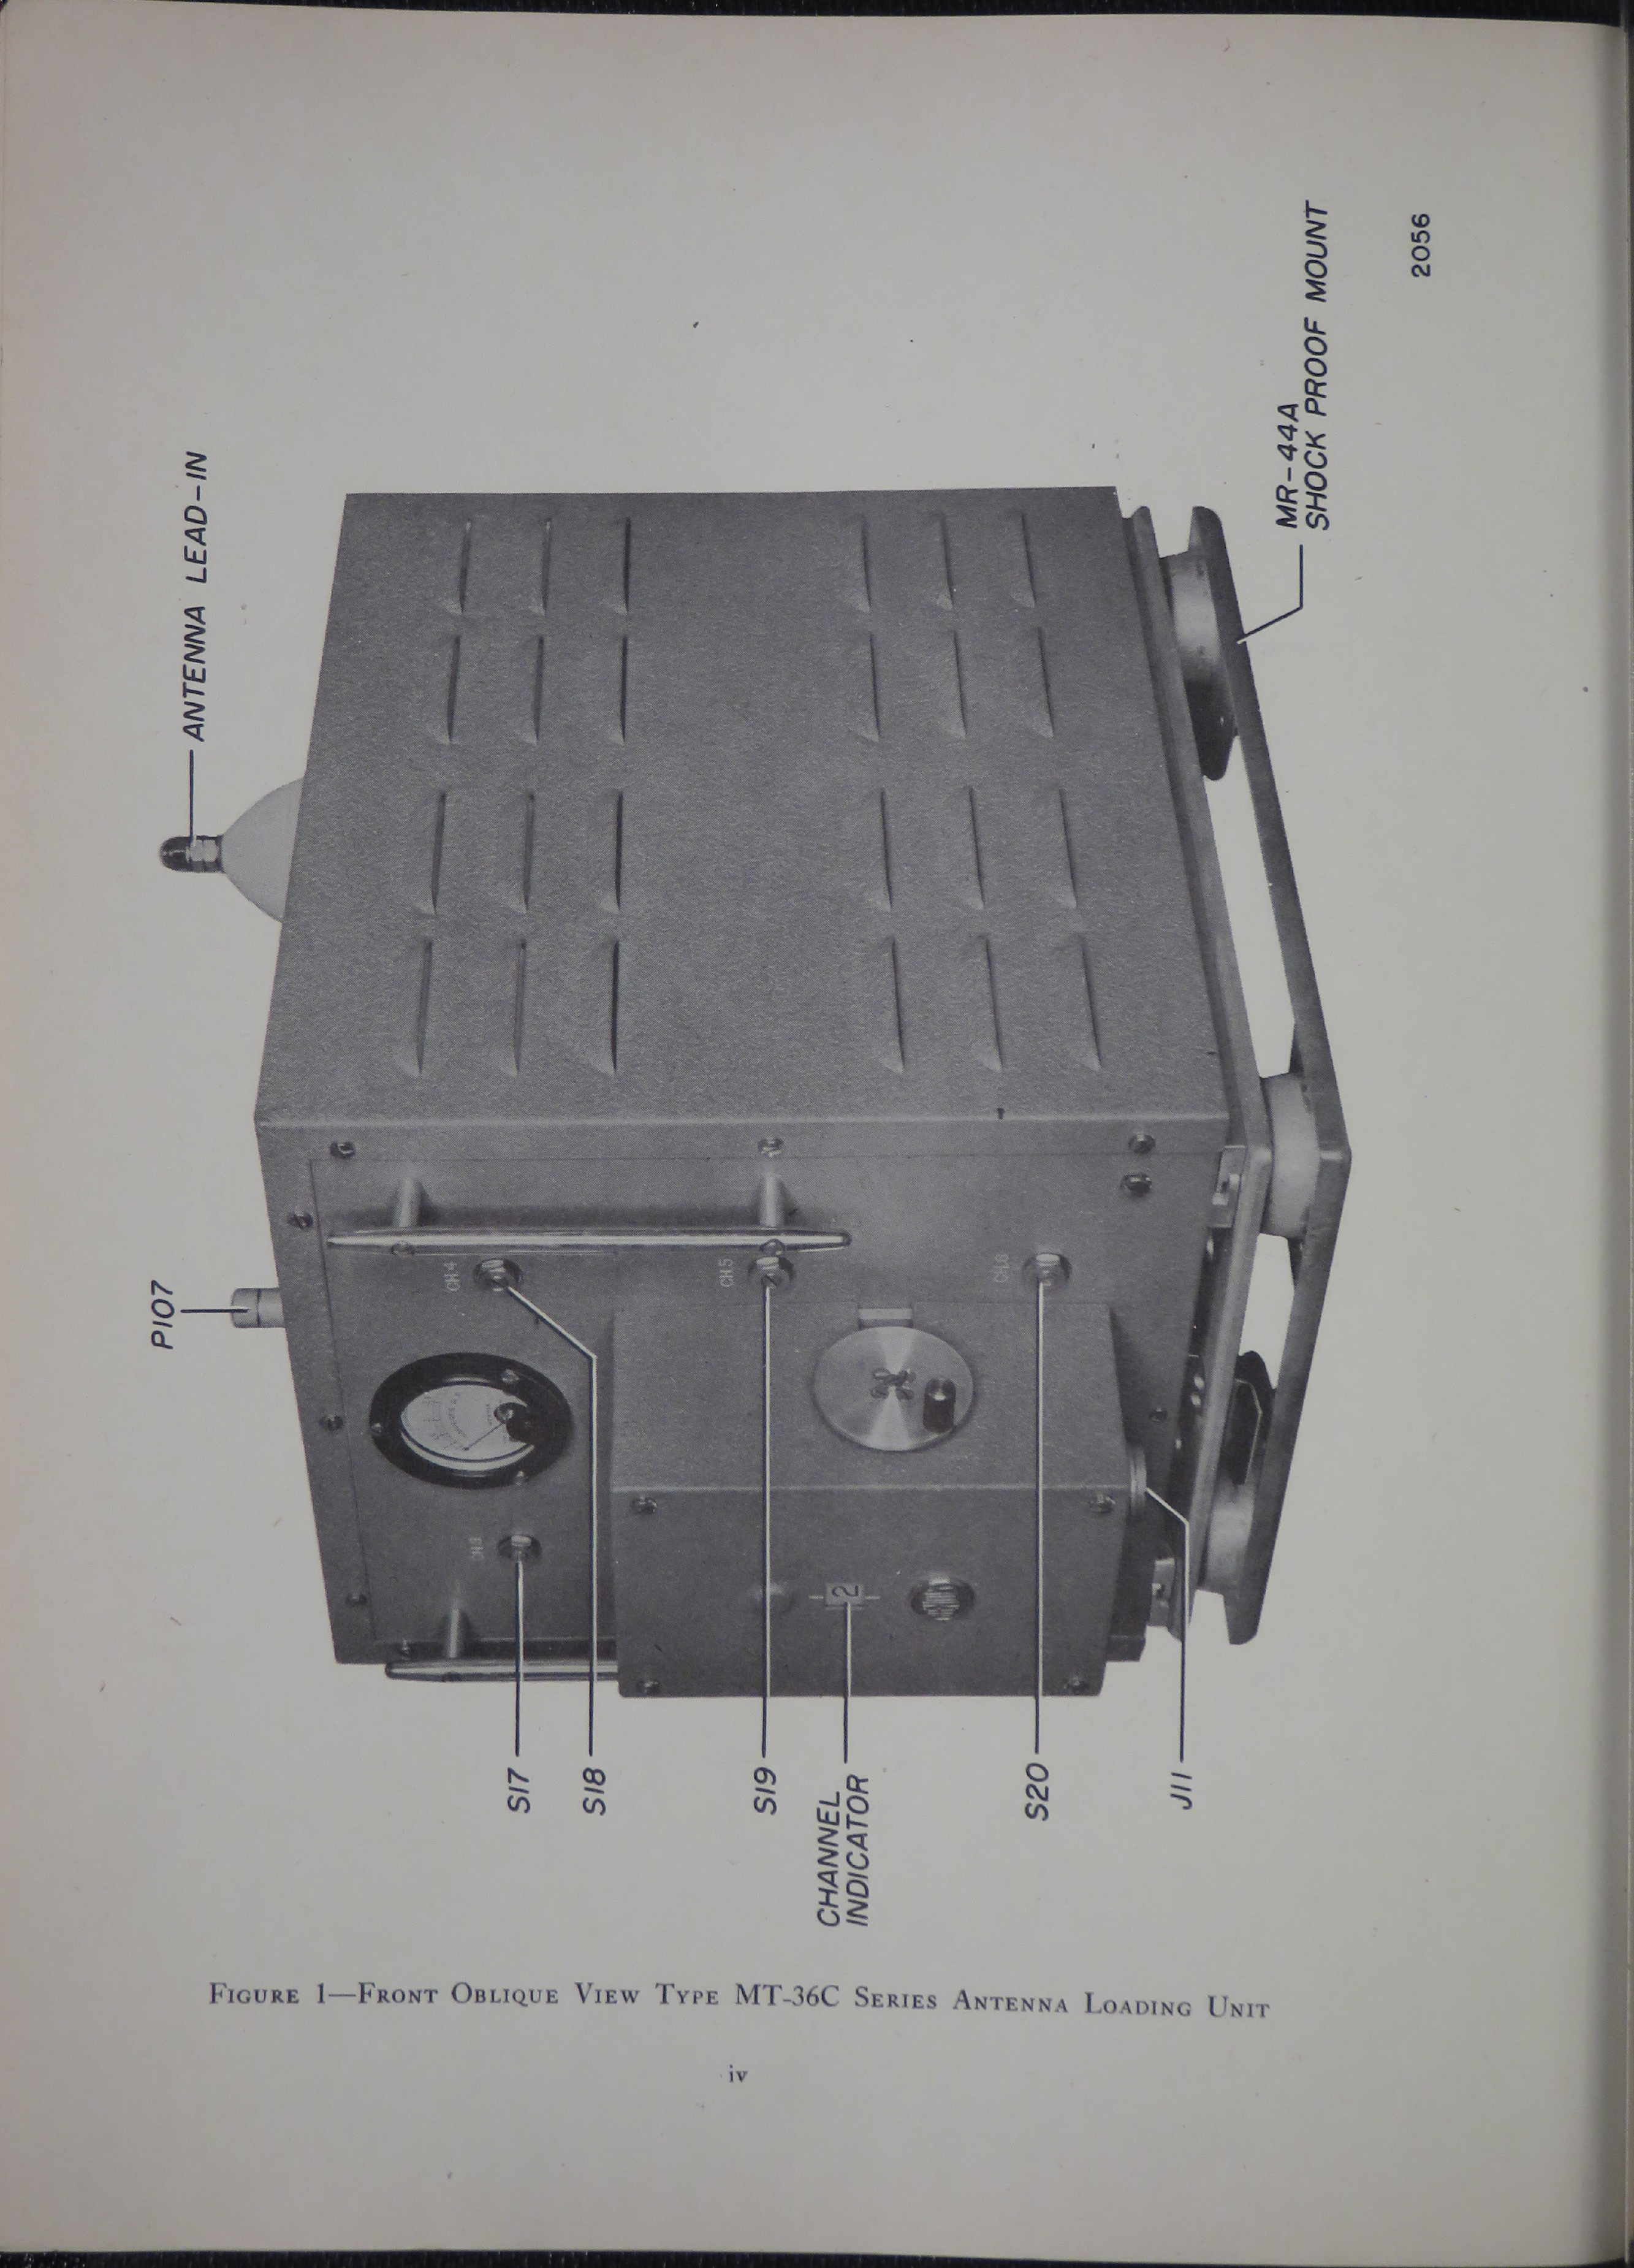 Sample page 6 from AirCorps Library document: Instruction Book for Types MT-36C and MT-36C-24 Antenna Loading Units